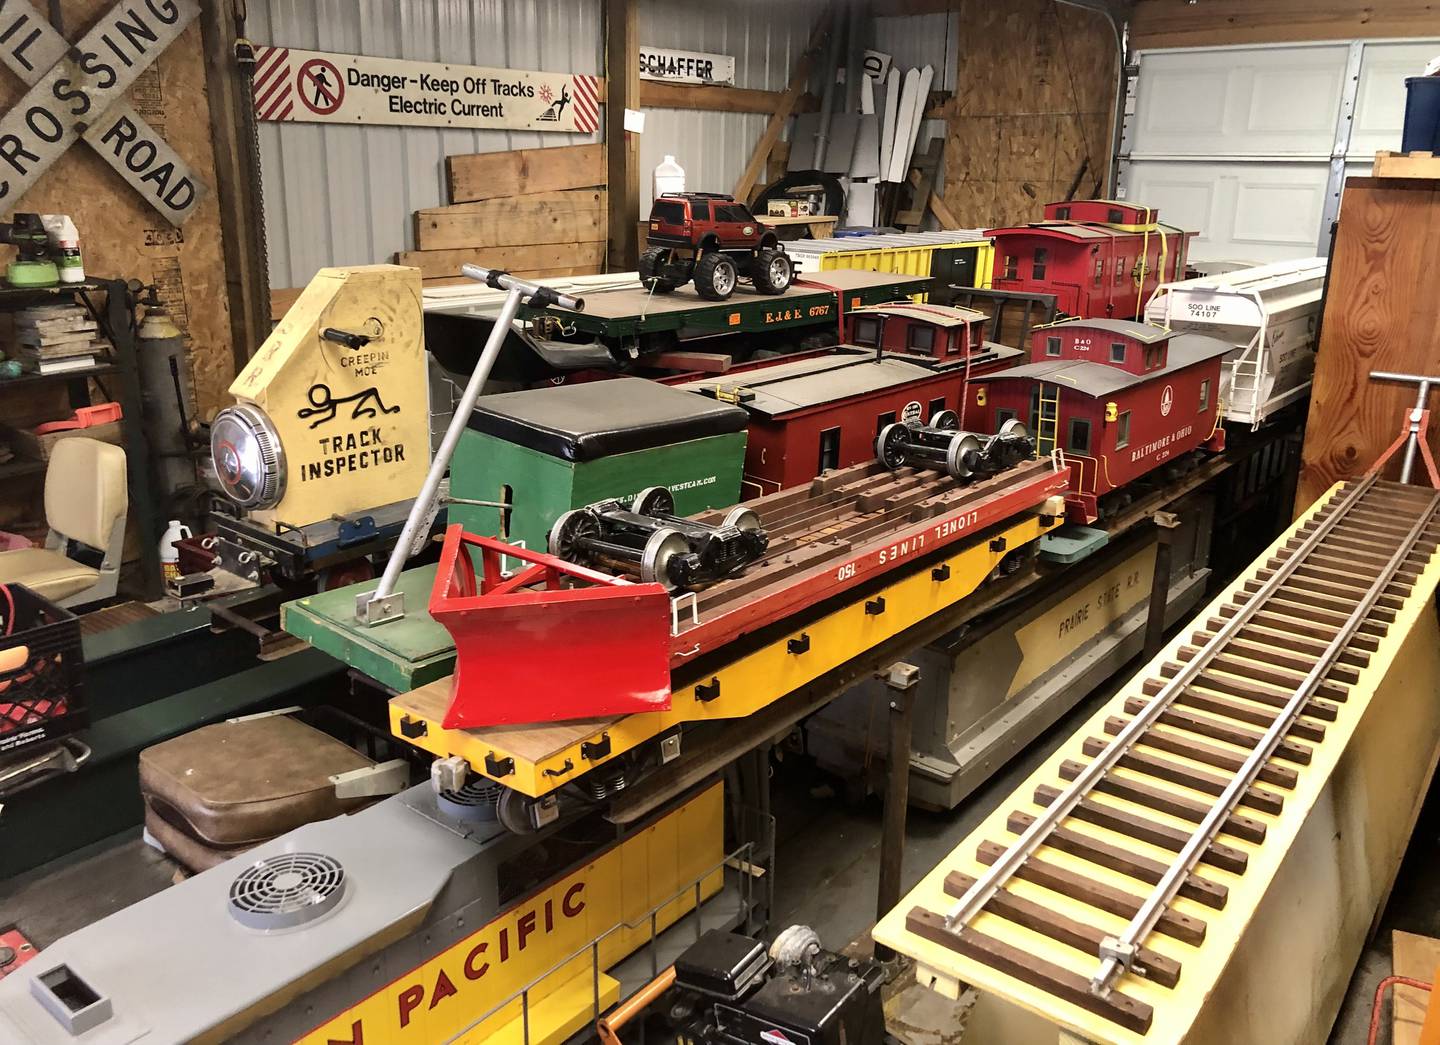 7.5 gauge trains in storage at the Prairie State Railroad Club hanger at Plowman's Park, similar to those that will be available for rides at the June 11 fundraising event.